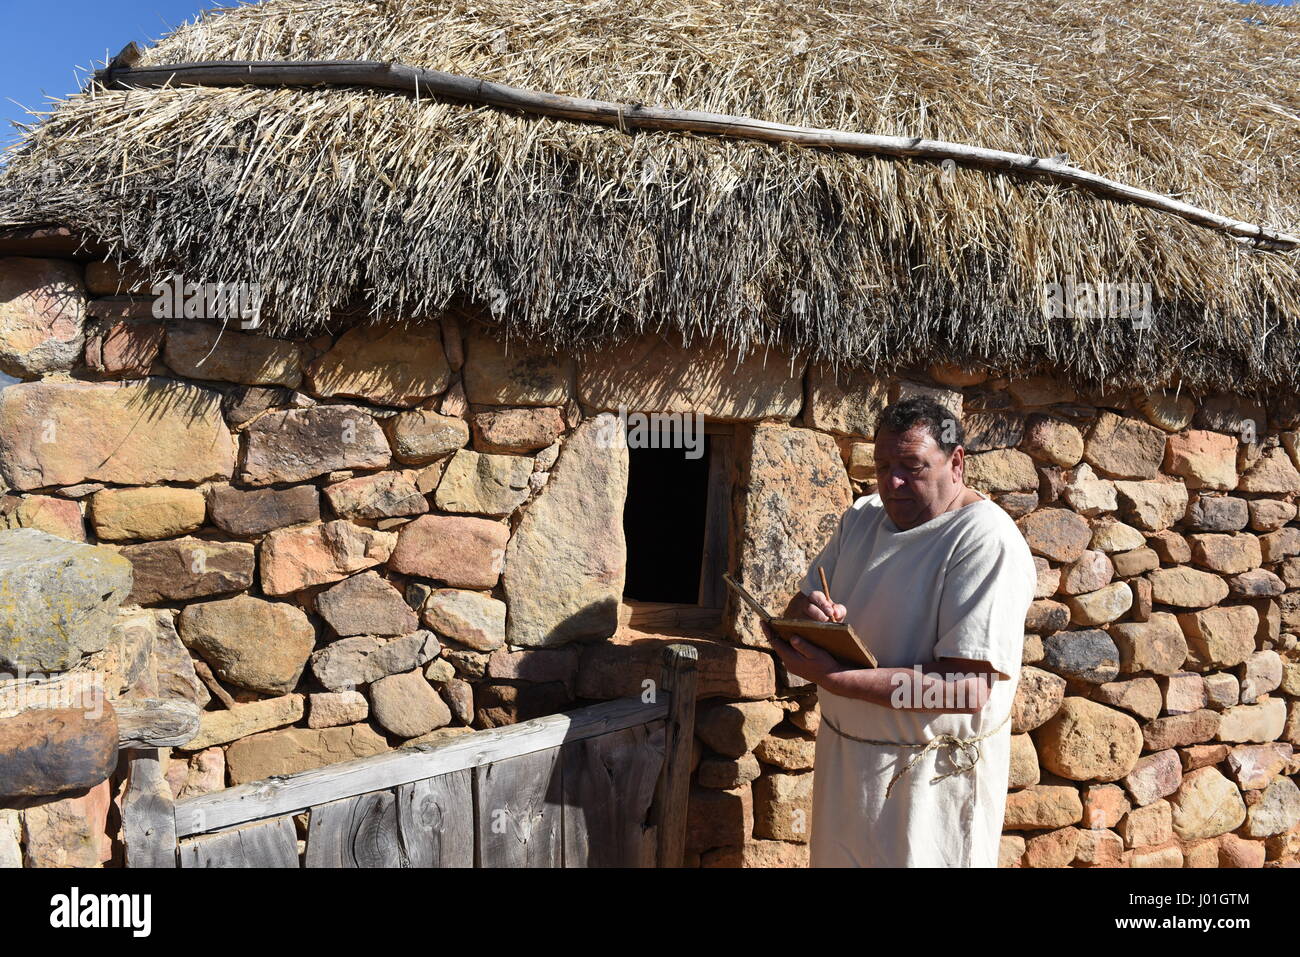 Garray, Spain. 08th Apr, 2017. A man wearing a costume of ancient times during a representation in the ancient Celtiberian settlement of Numantia, famous for its role in the Celtiberian War, in Soria, north of Spain. Credit: Jorge Sanz/Pacific Press/Alamy Live News Stock Photo